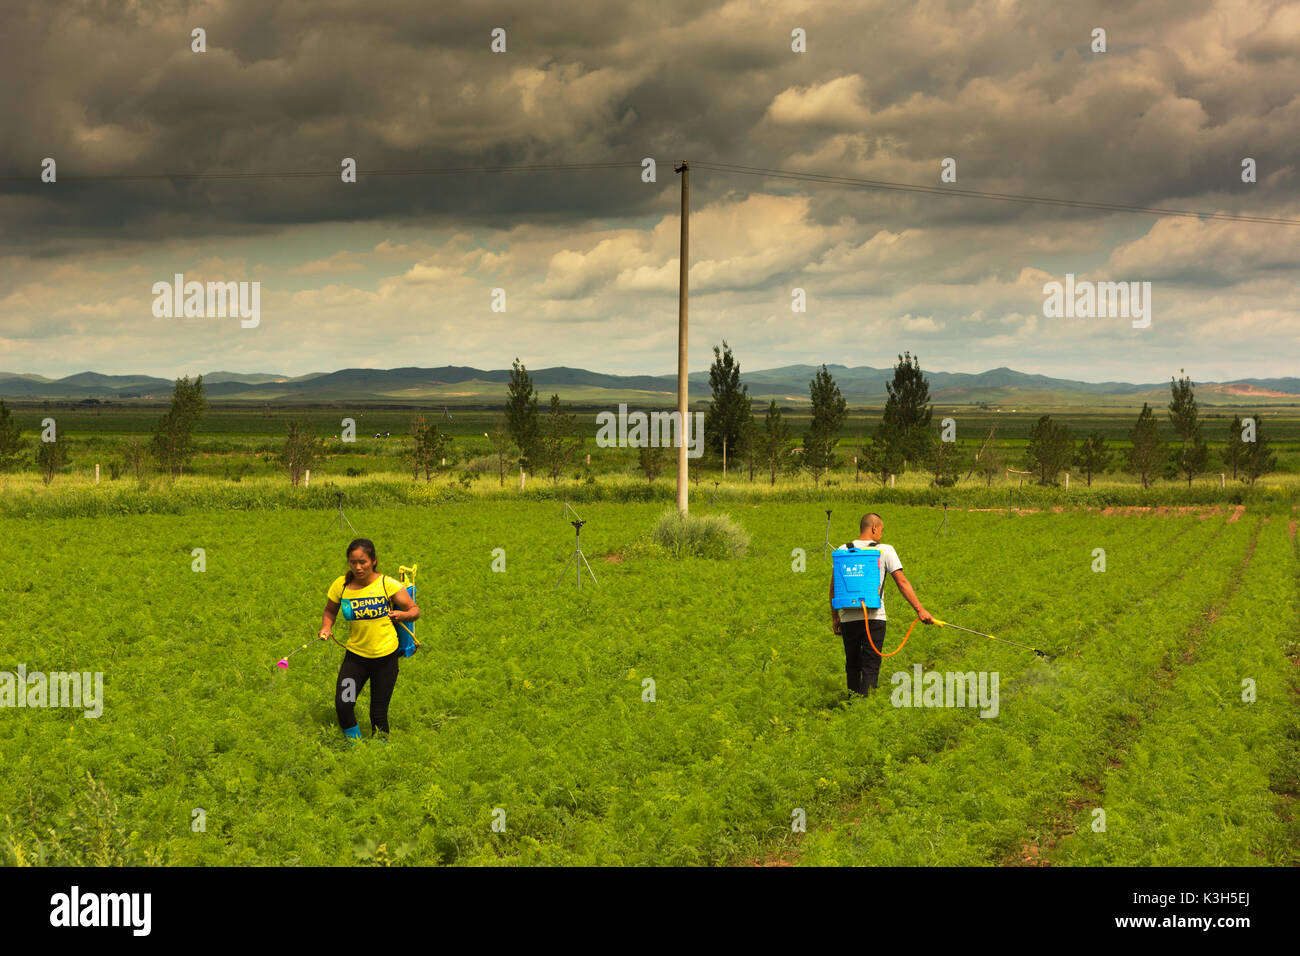 Inner Mongolia, China- July 27, 2017: Unidentified people apply agricultural pesticide spraying to the field in rural areas of Inner Mongolia. Stock Photo